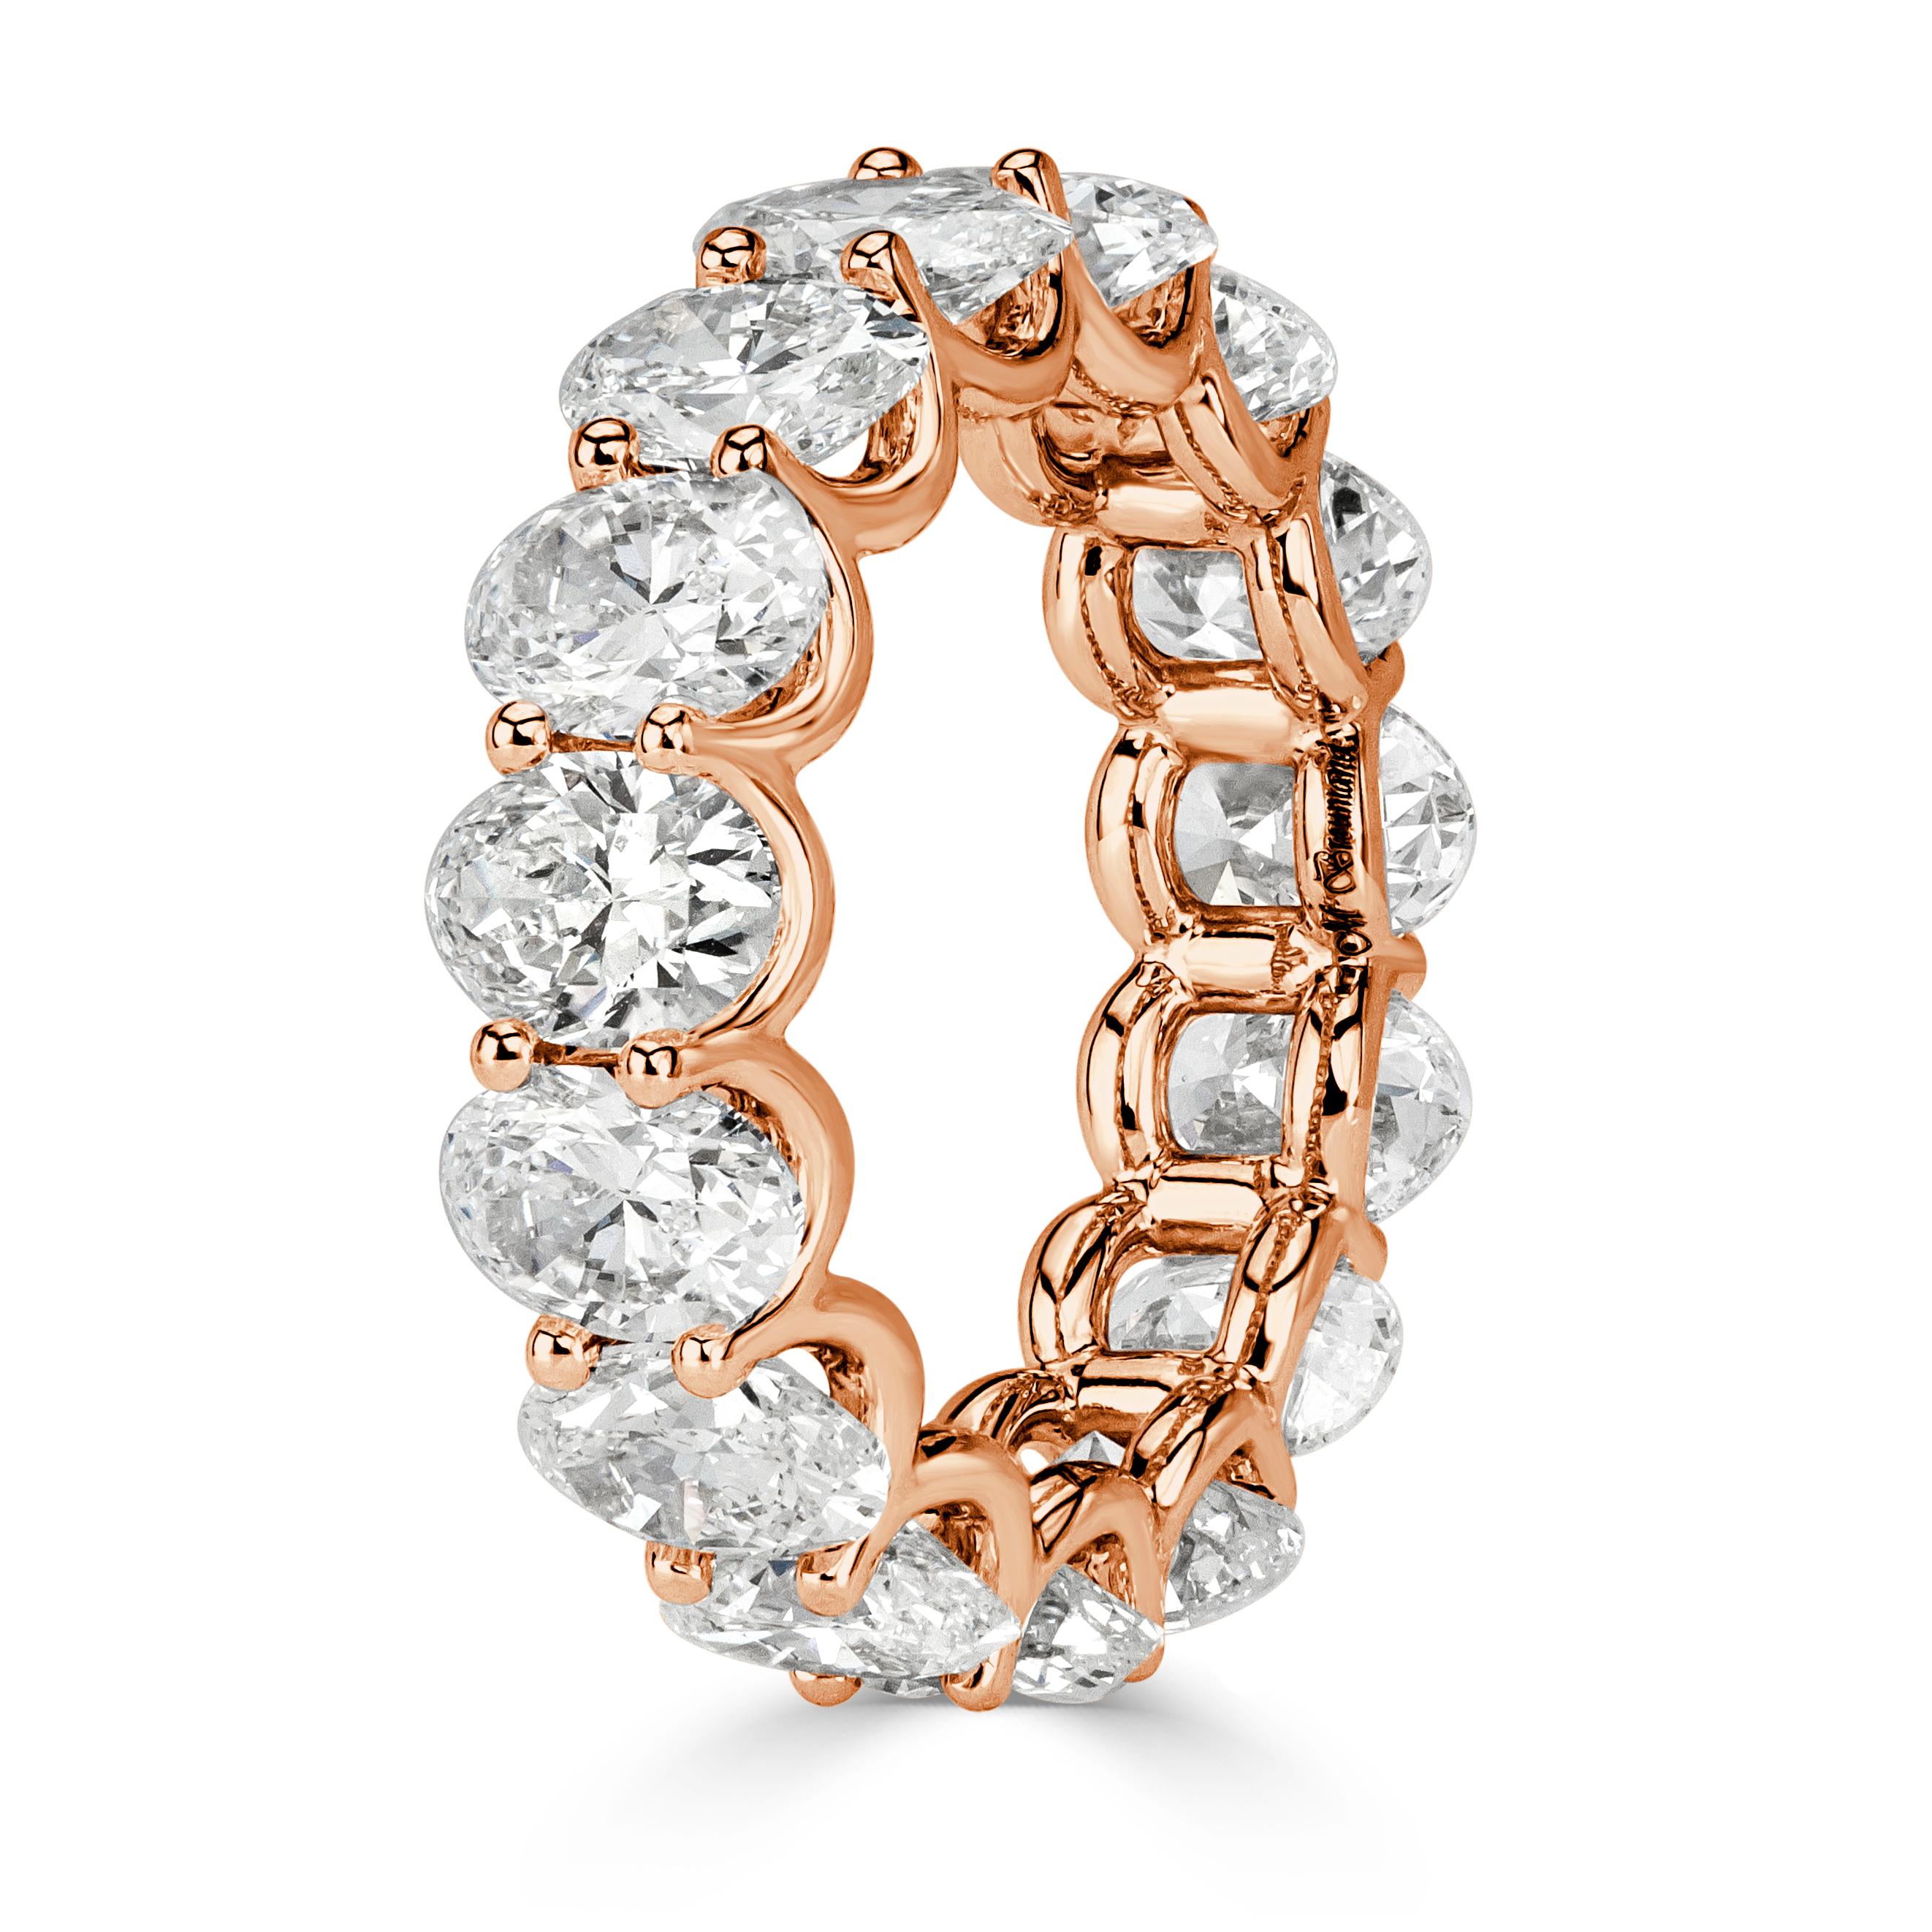 Custom created in 18k rose gold, this dazzling diamond eternity band shaowcases 7.64ct of oval cut diamonds graded at E-F, VS1-VS2. They are seemlessly matched and set in a U-prong setting style with hardly any metal showing. All eternity bands are